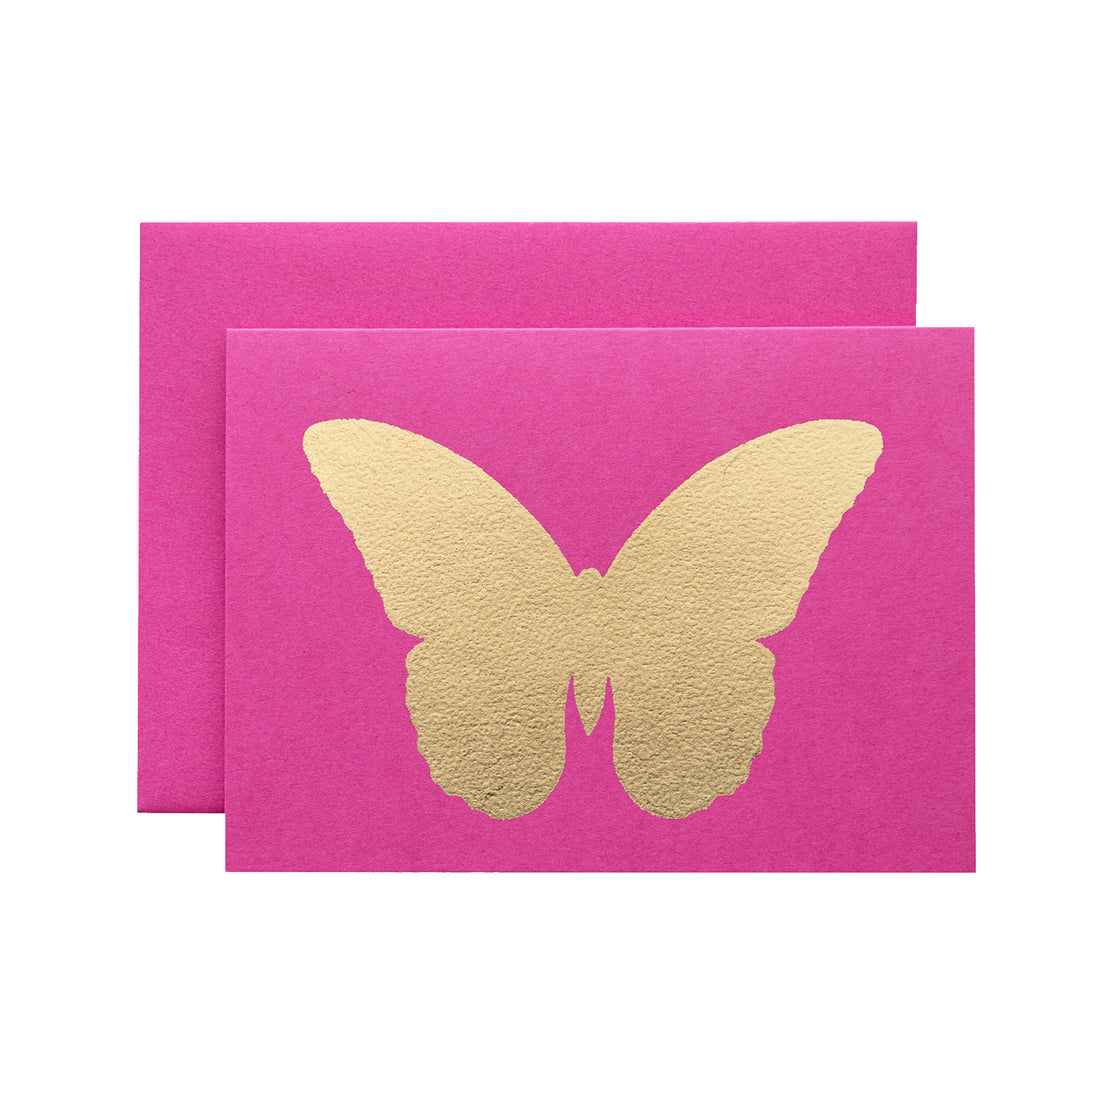 A pink card featuring the silhouette of a butterfly in solid gold leaf.